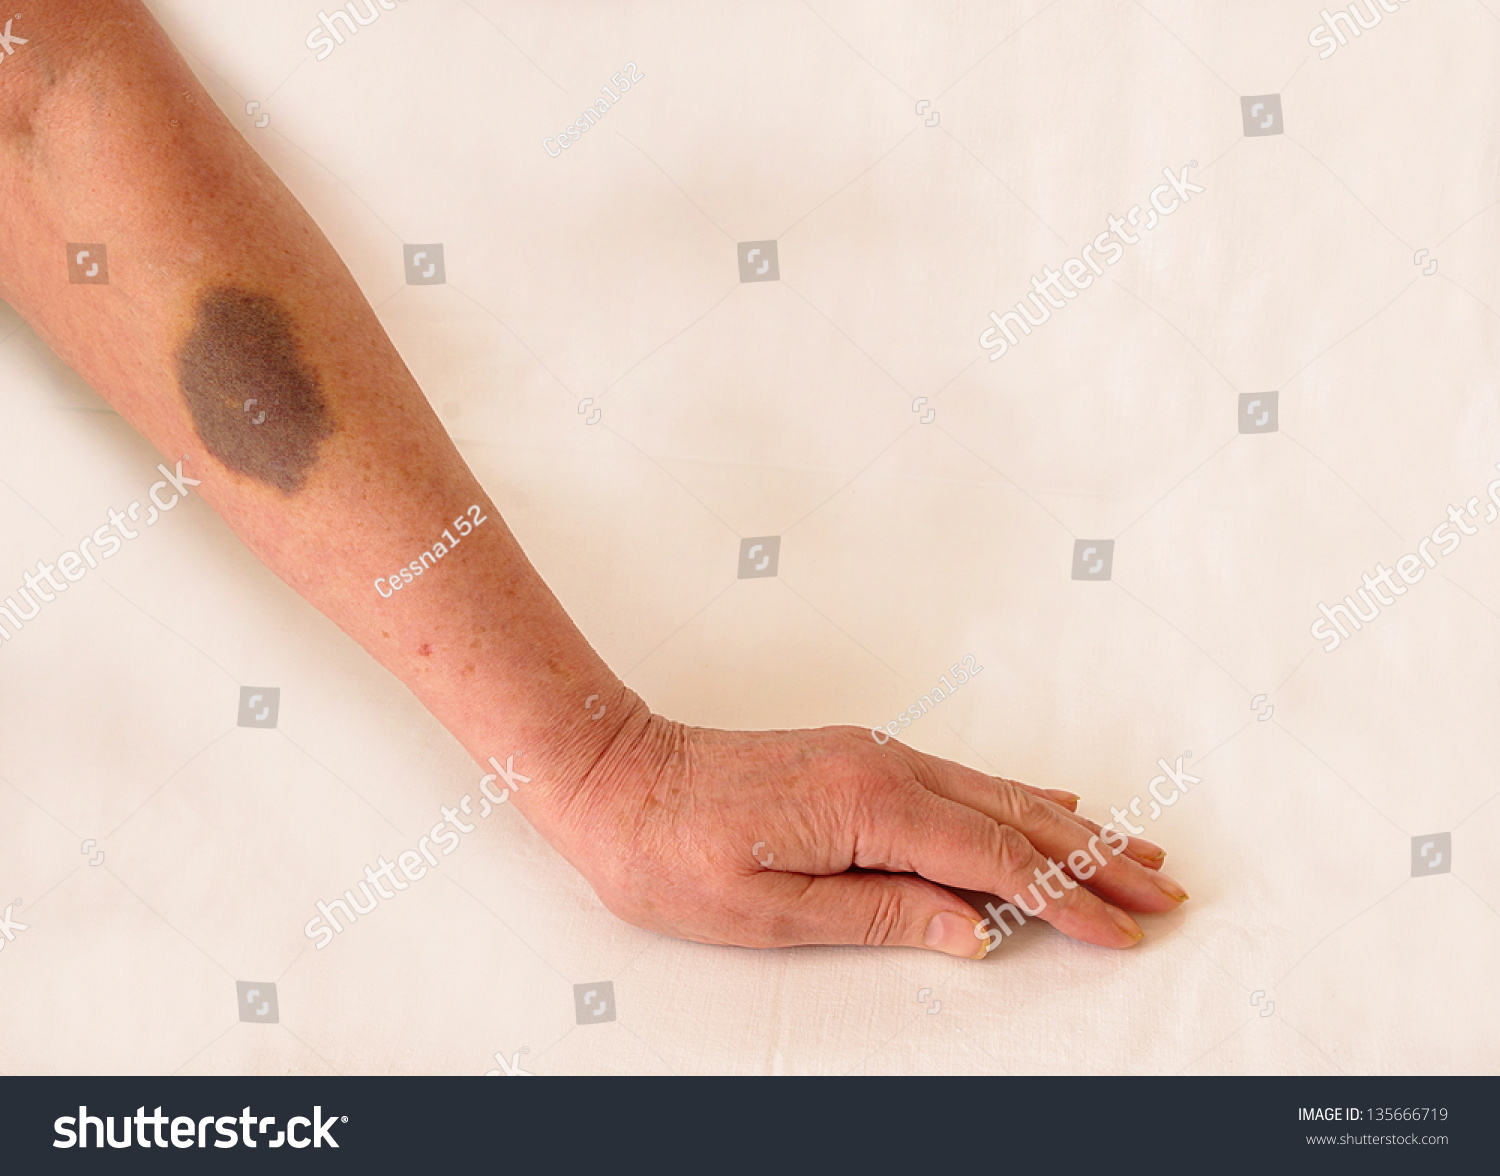 Bruise After Drawn Blood On Arm Stock Photo 135666719 Shutterstock